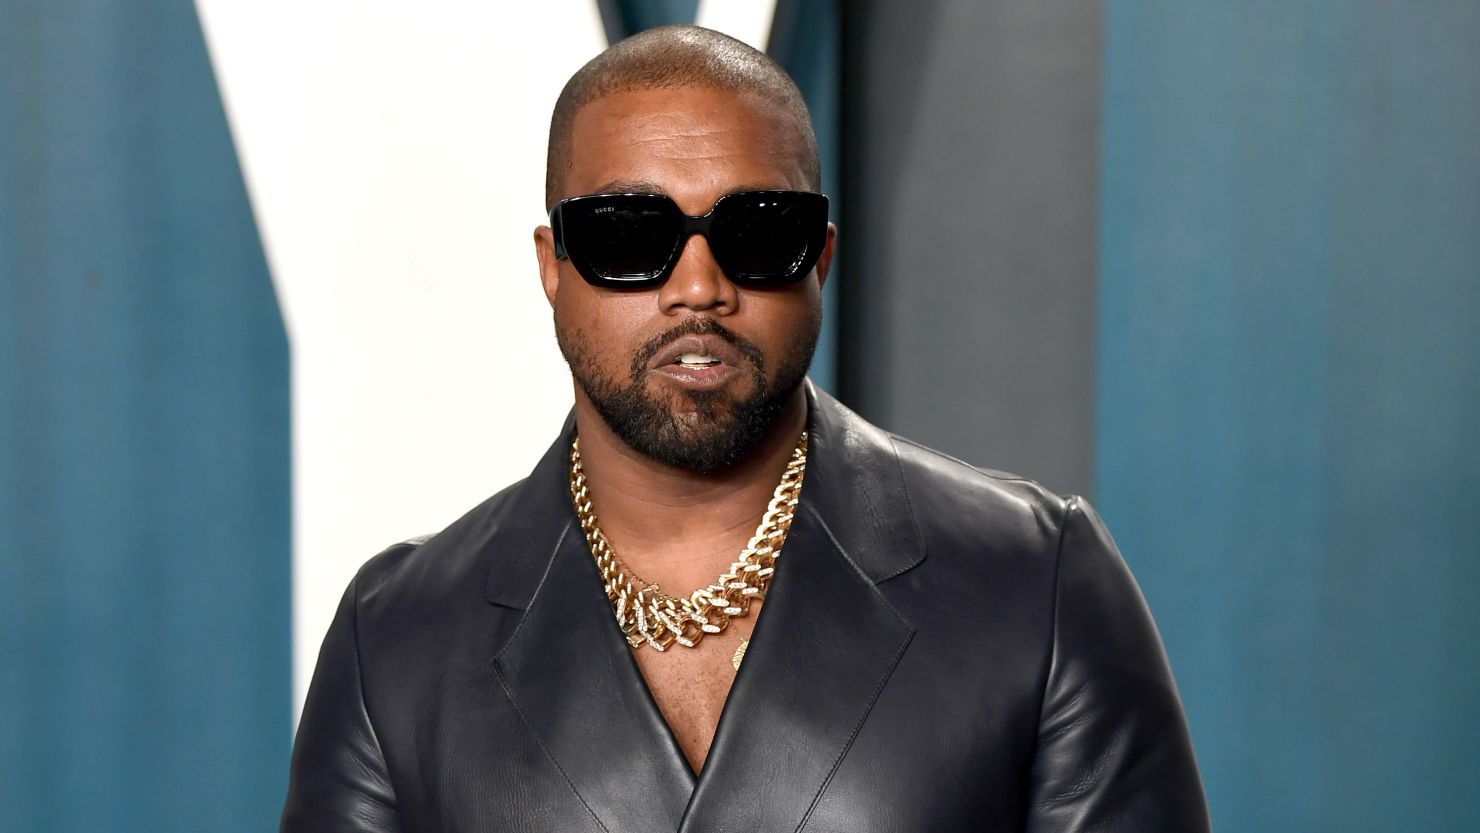 Kanye West filed for legal permission to change his name back in August.